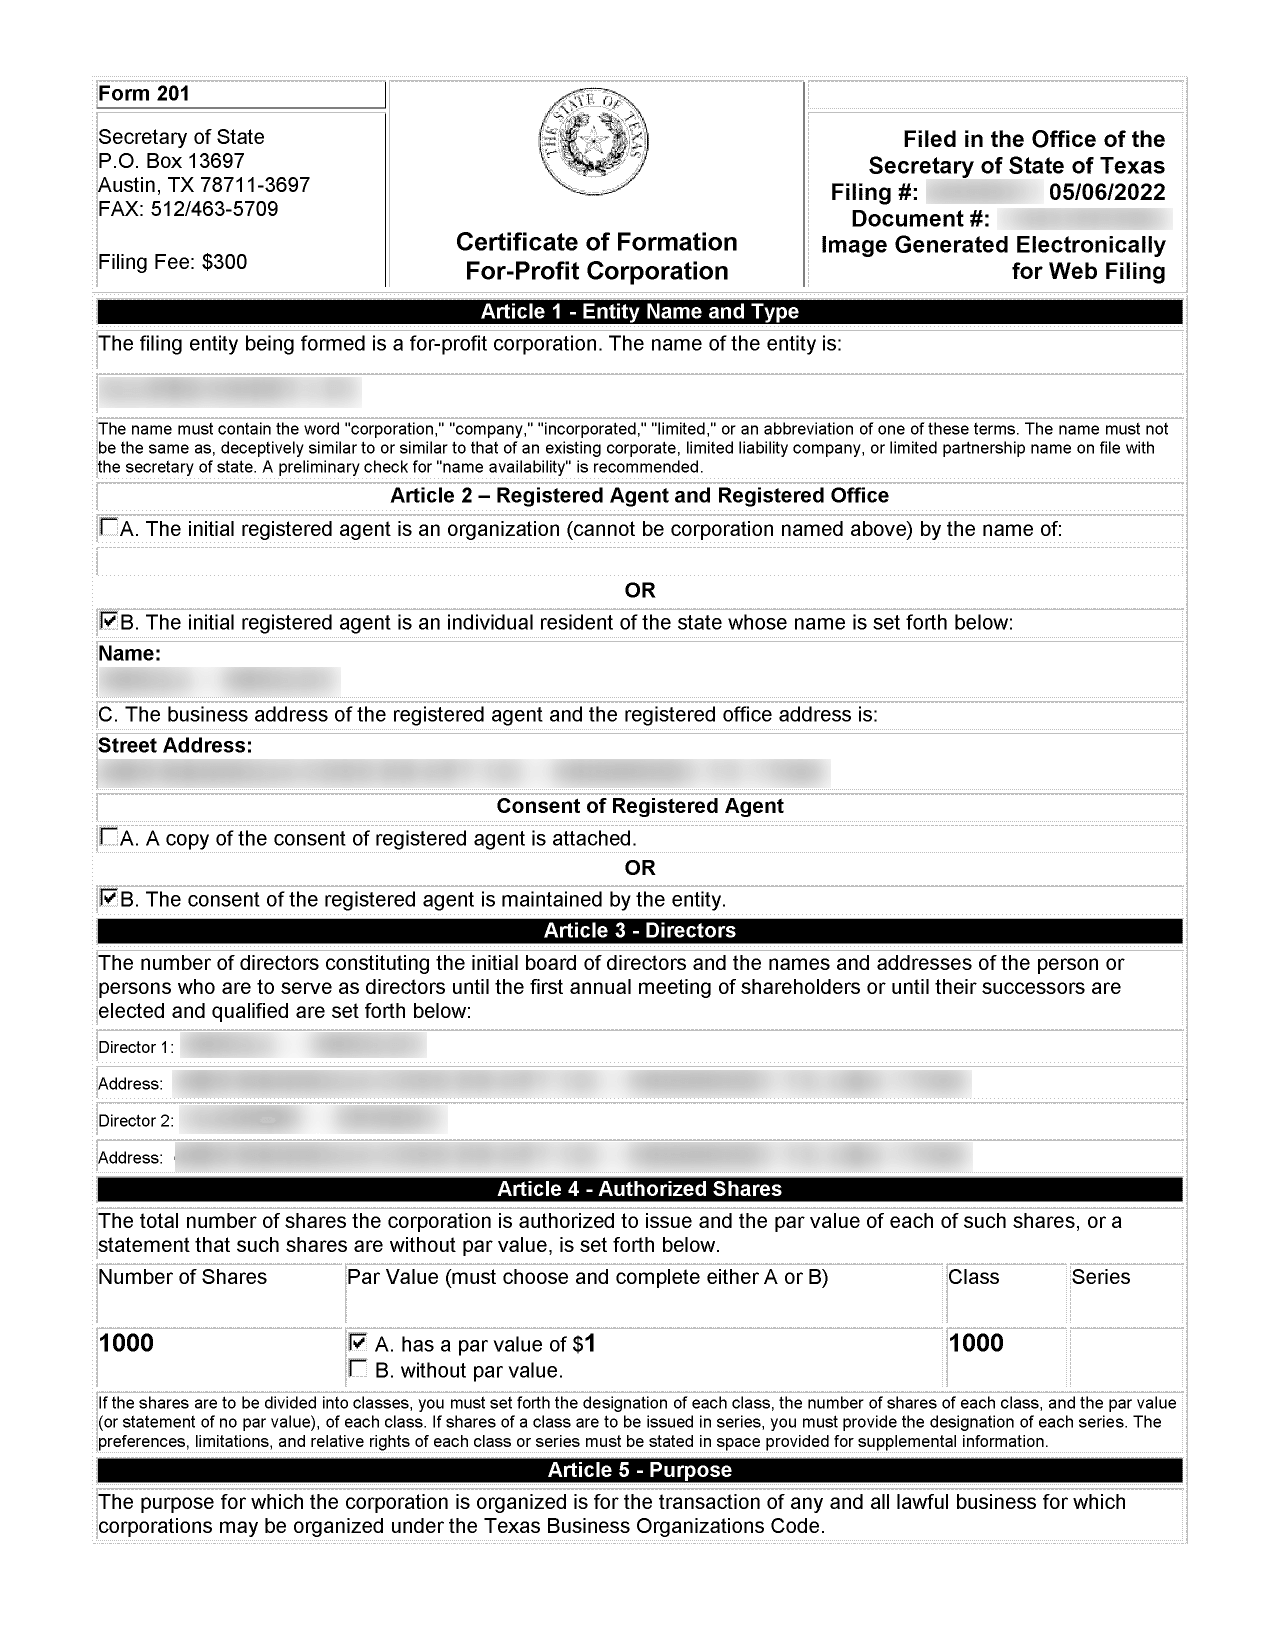 texas certificate of formation